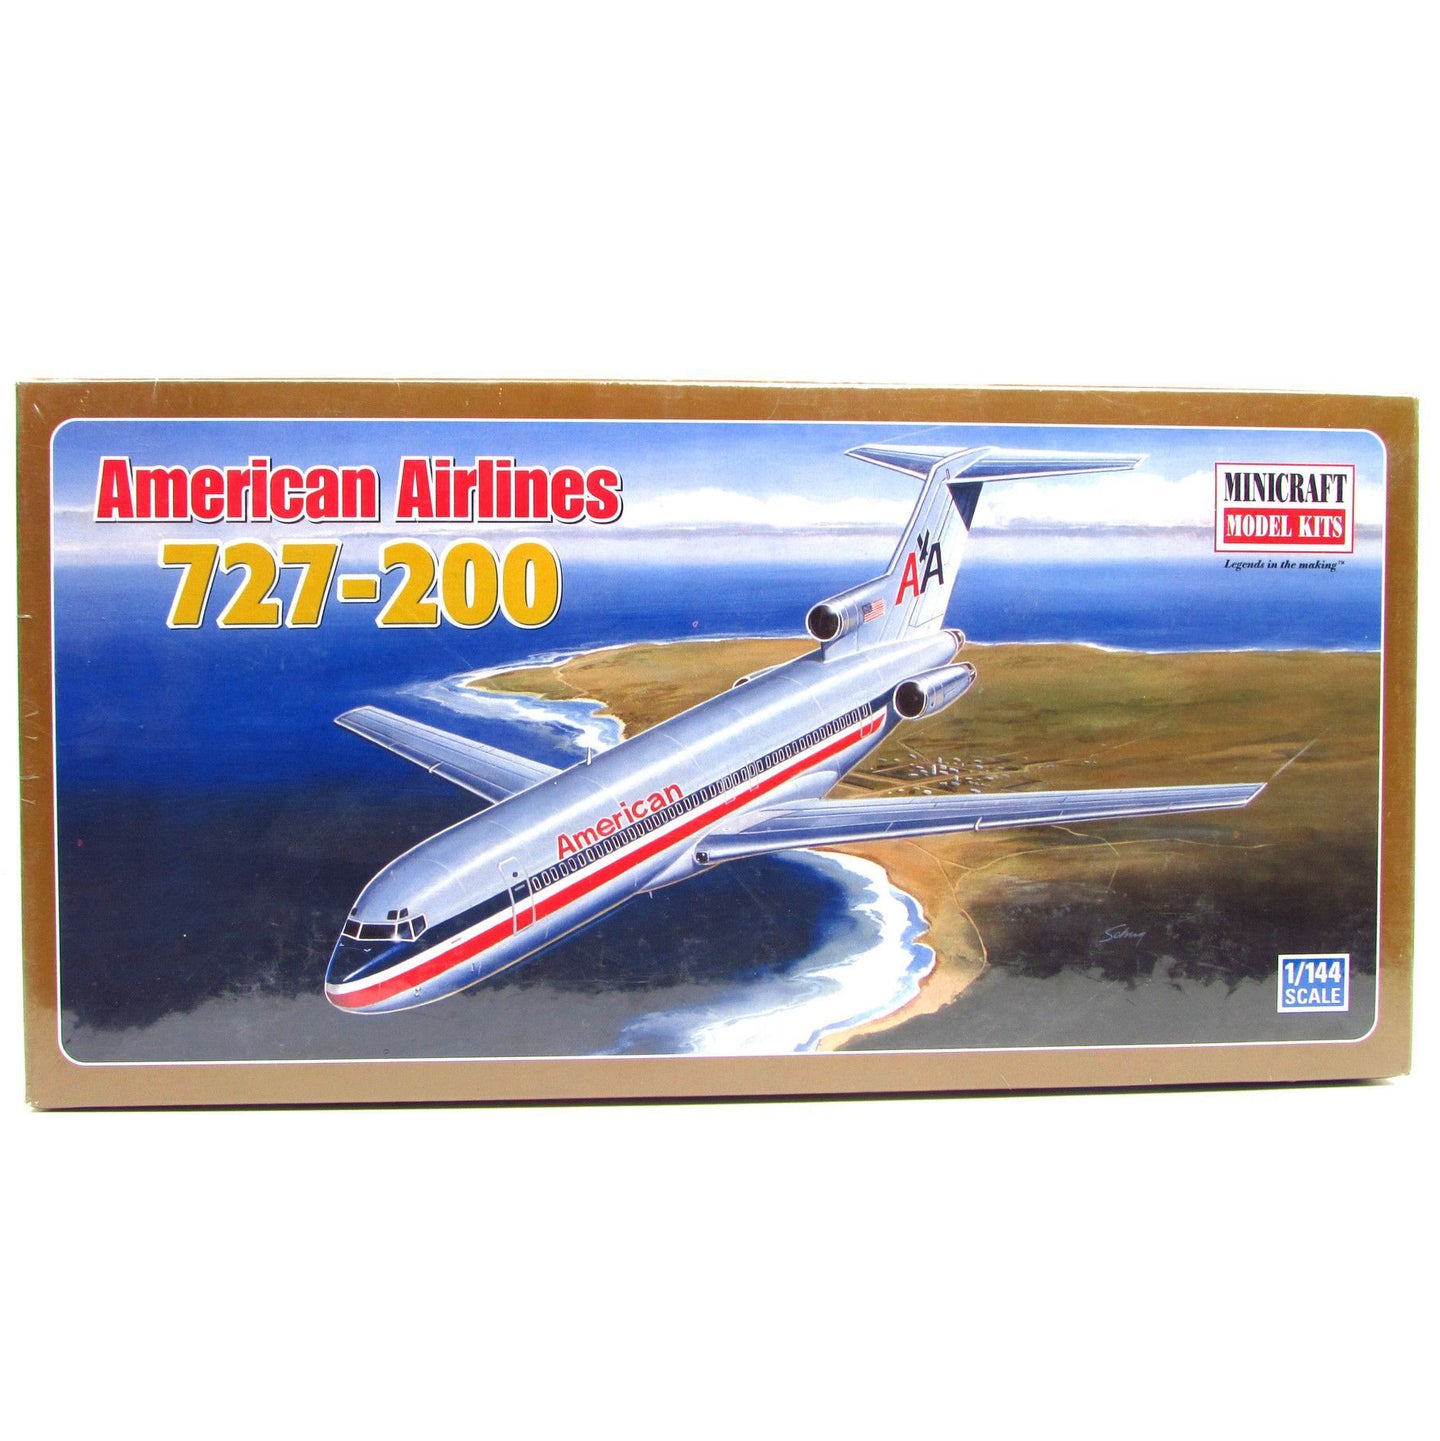 Minicraft 1/144 American Airlines 727-200 14512